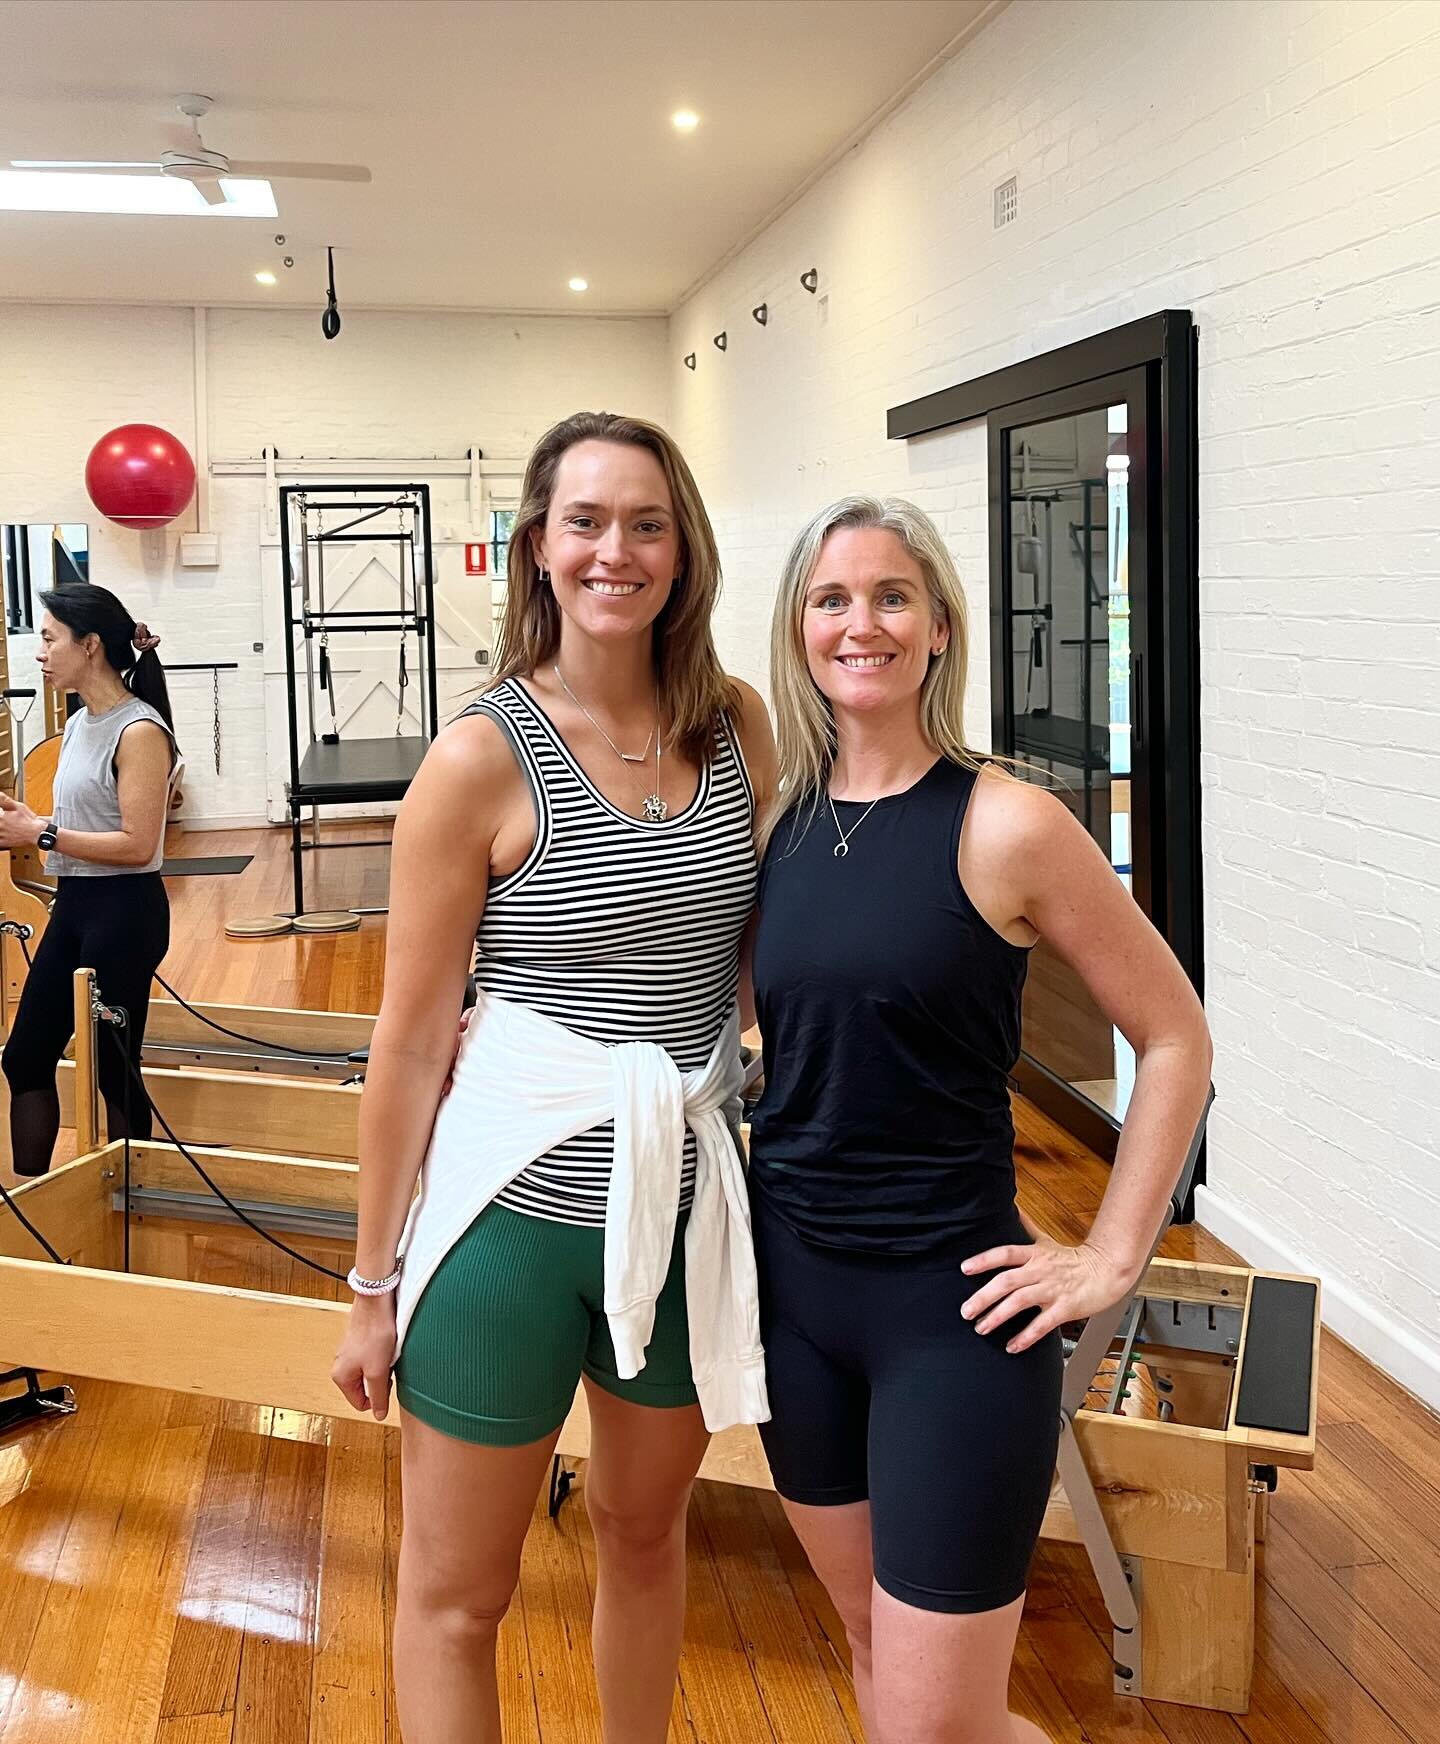 Today Kate &amp; I attended the Pilates Brunch! A day of workshops for Pilates instructors to upskill and learn 🤓
We have both been teaching for a long time, however there is always an opportunity to learn new skills and grow so we can be better ins